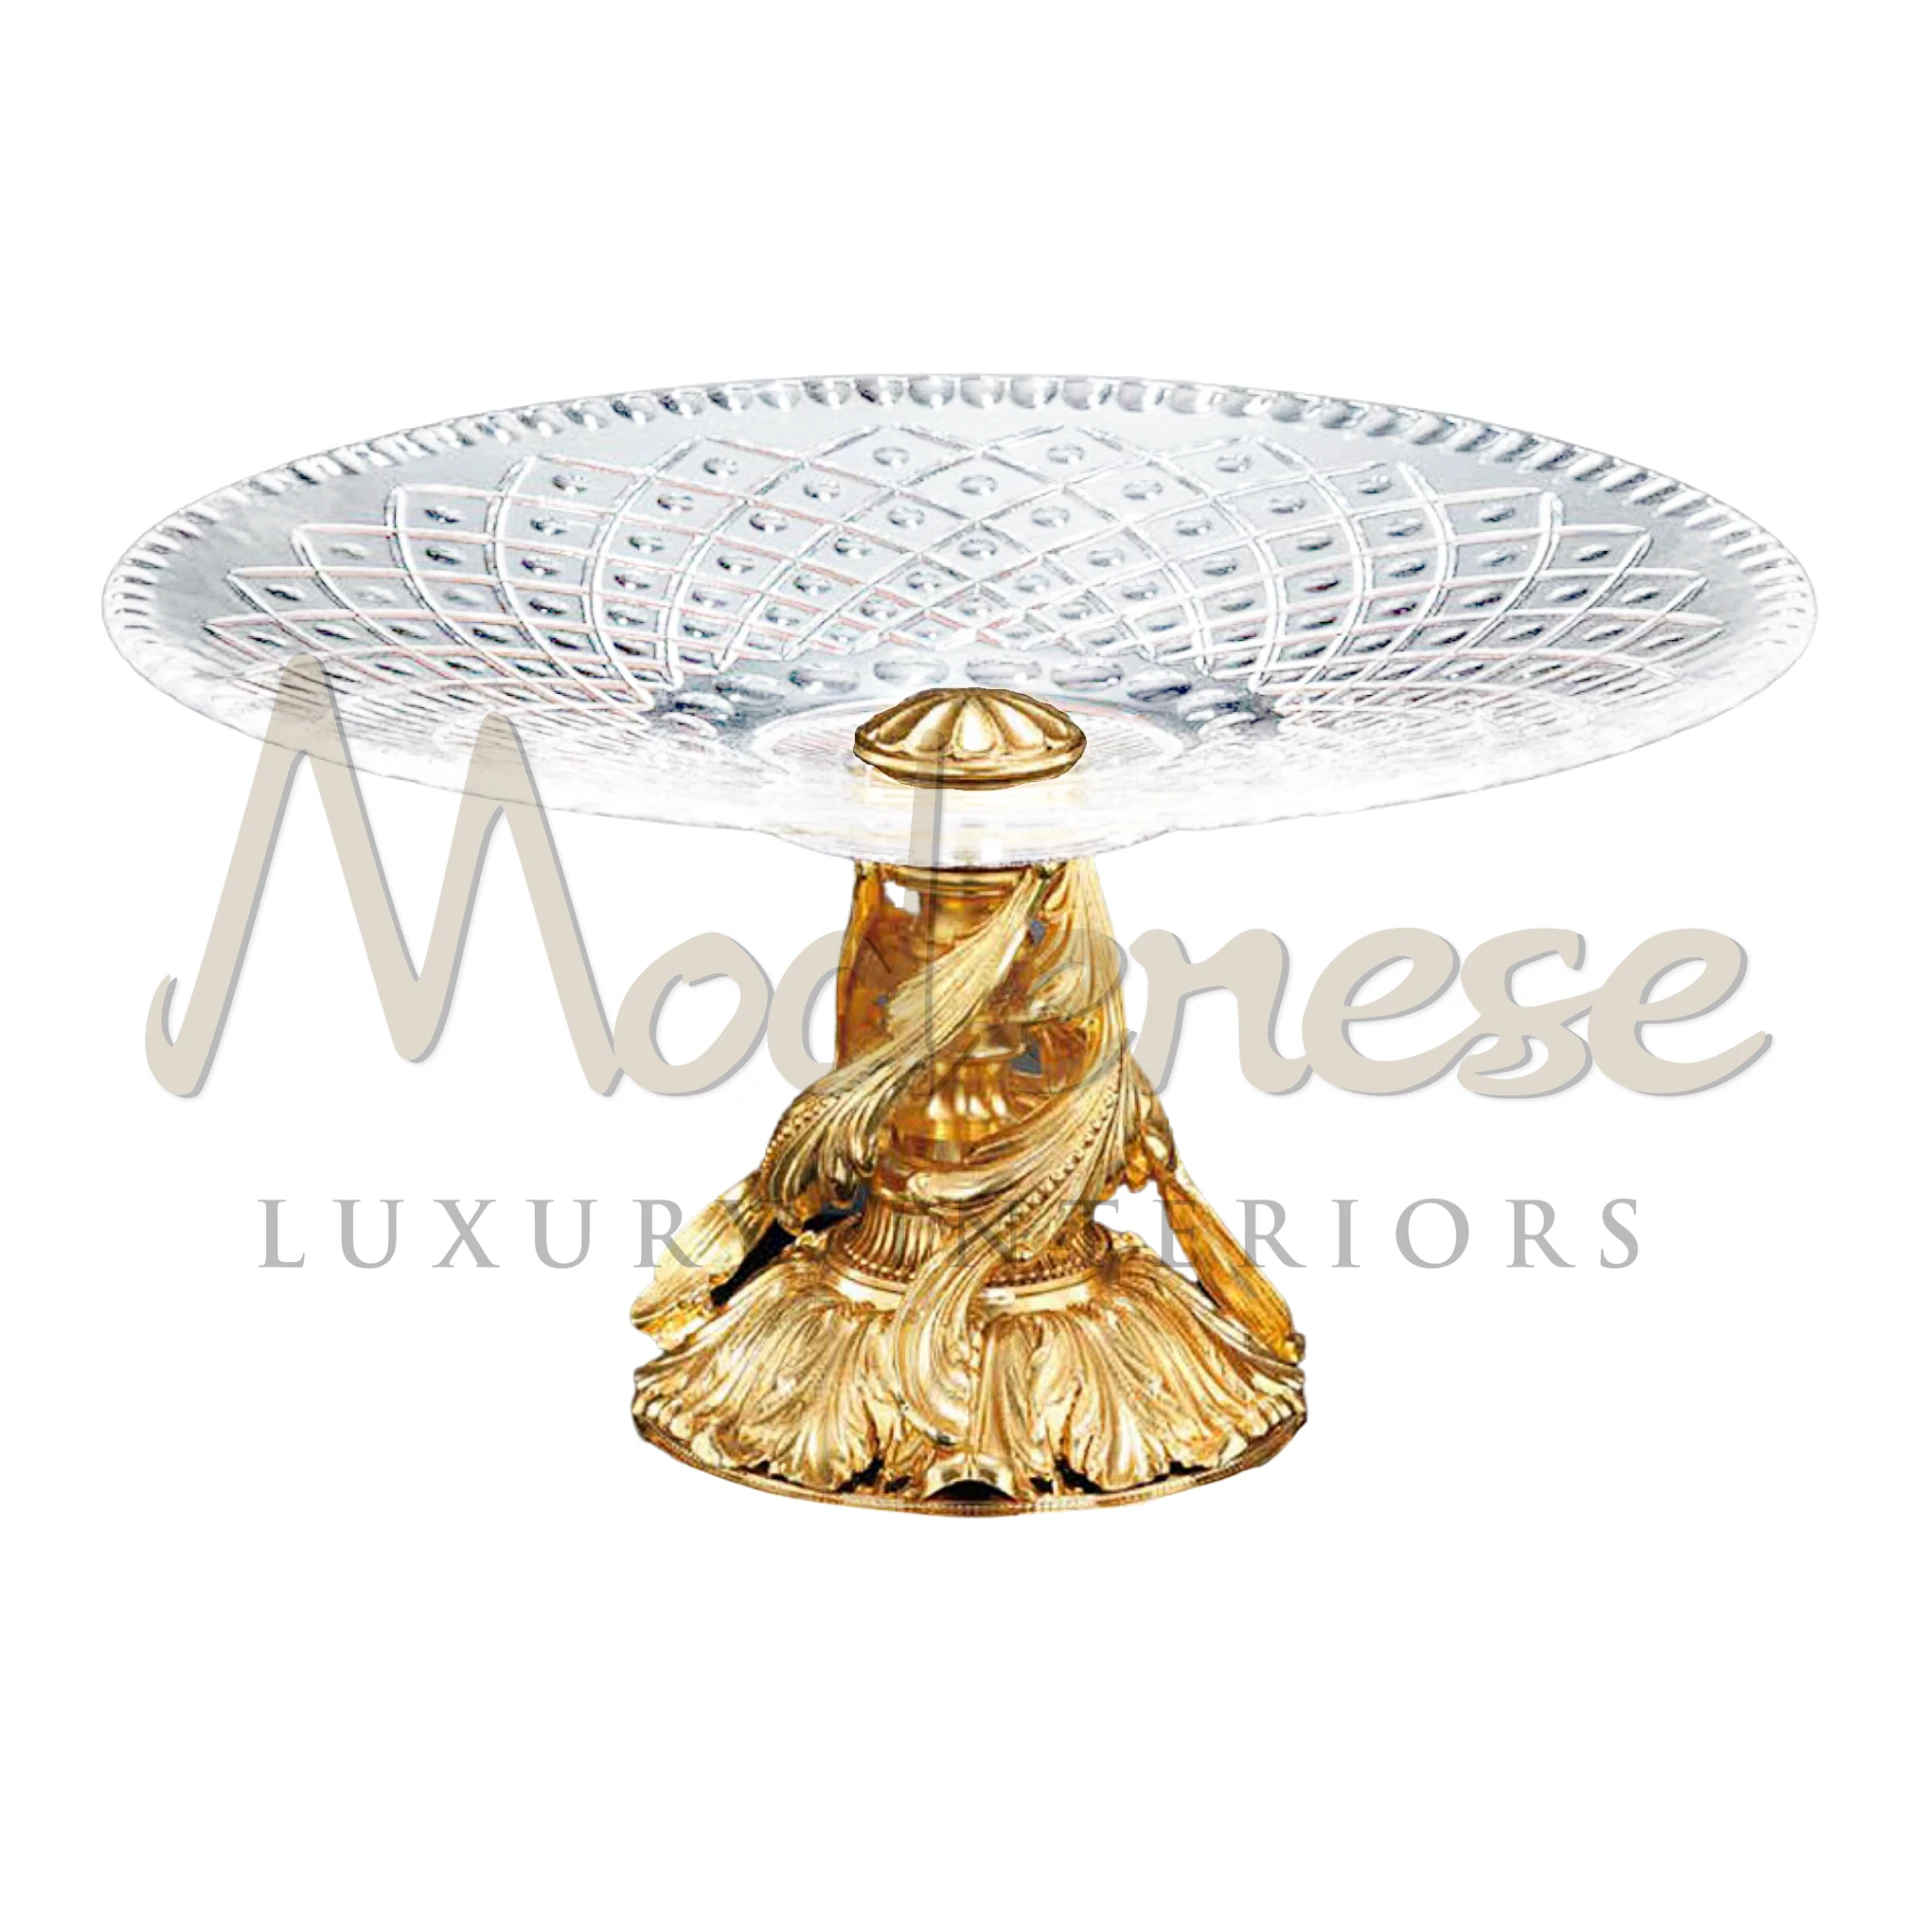 High-quality Elegant Crystal Bowl by Modenese, showcasing intricate detailing and a unique shape for a luxurious interior statement.